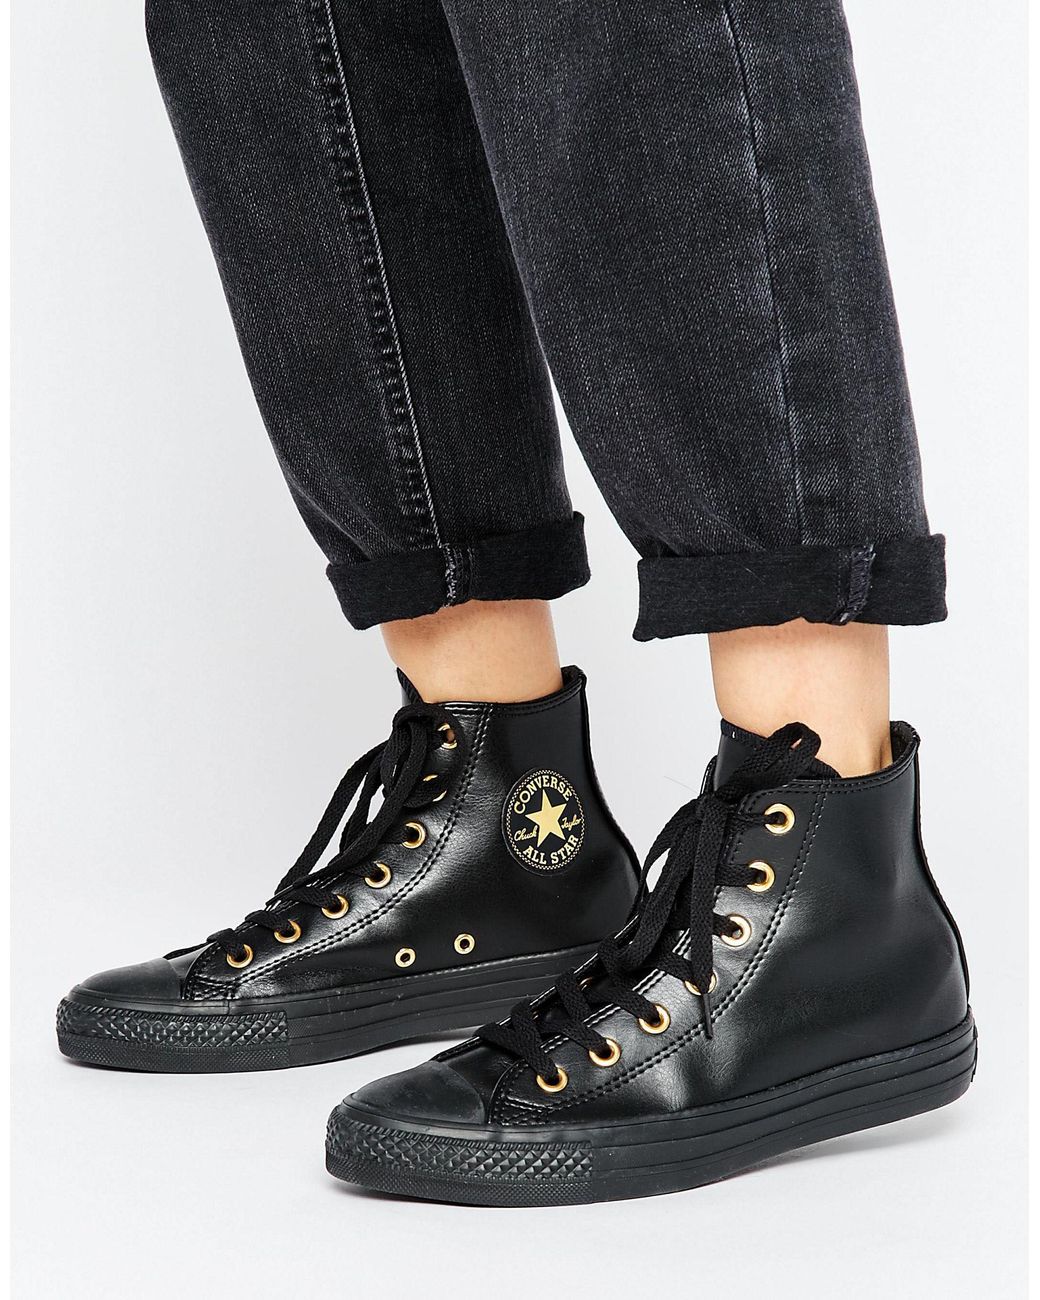 Converse Chuck Taylor Top Sneakers Black With Eyelets | Lyst